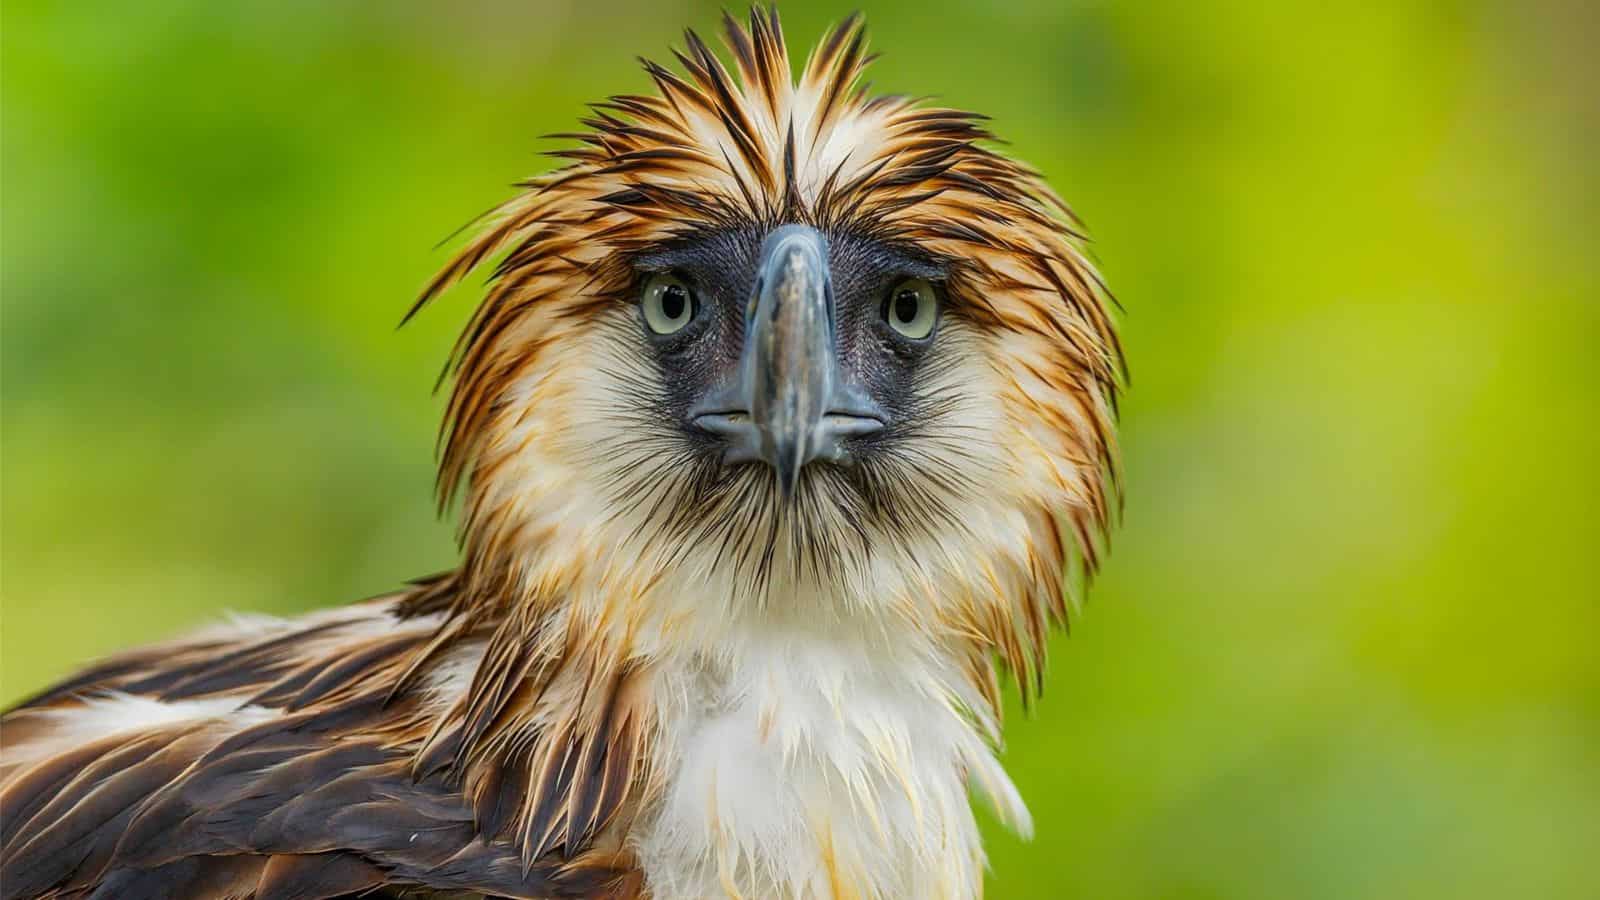 <p><span>The Philippine eagle, the national symbol of the Philippines, is critically endangered, with only 400 breeding pairs remaining across four islands. Hunting, shooting, and deforestation continue to hang over this species, calling for the critical need for the conservation of tropical rainforests in the Philippines. </span></p>